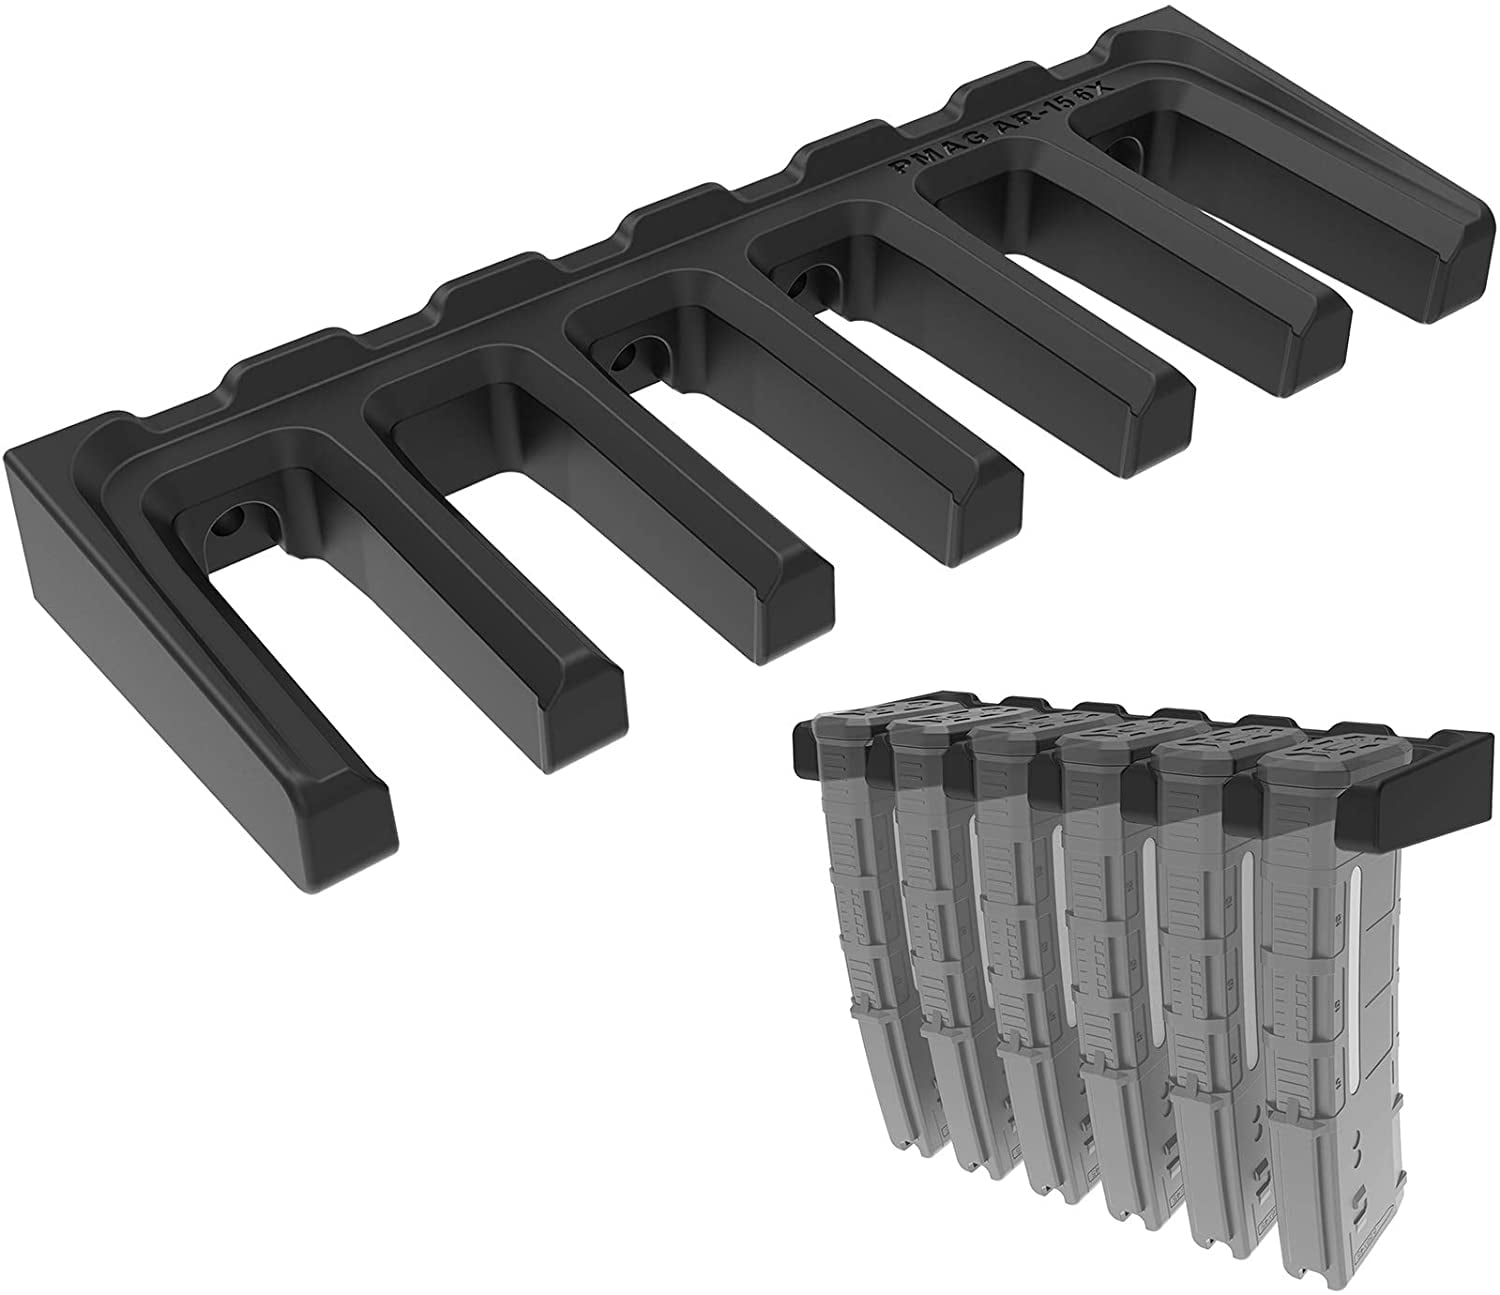 Details about   PMAG 5x Wall Mount Mag Rack Holder 223/556 Warlock Mounts Made In The USA 